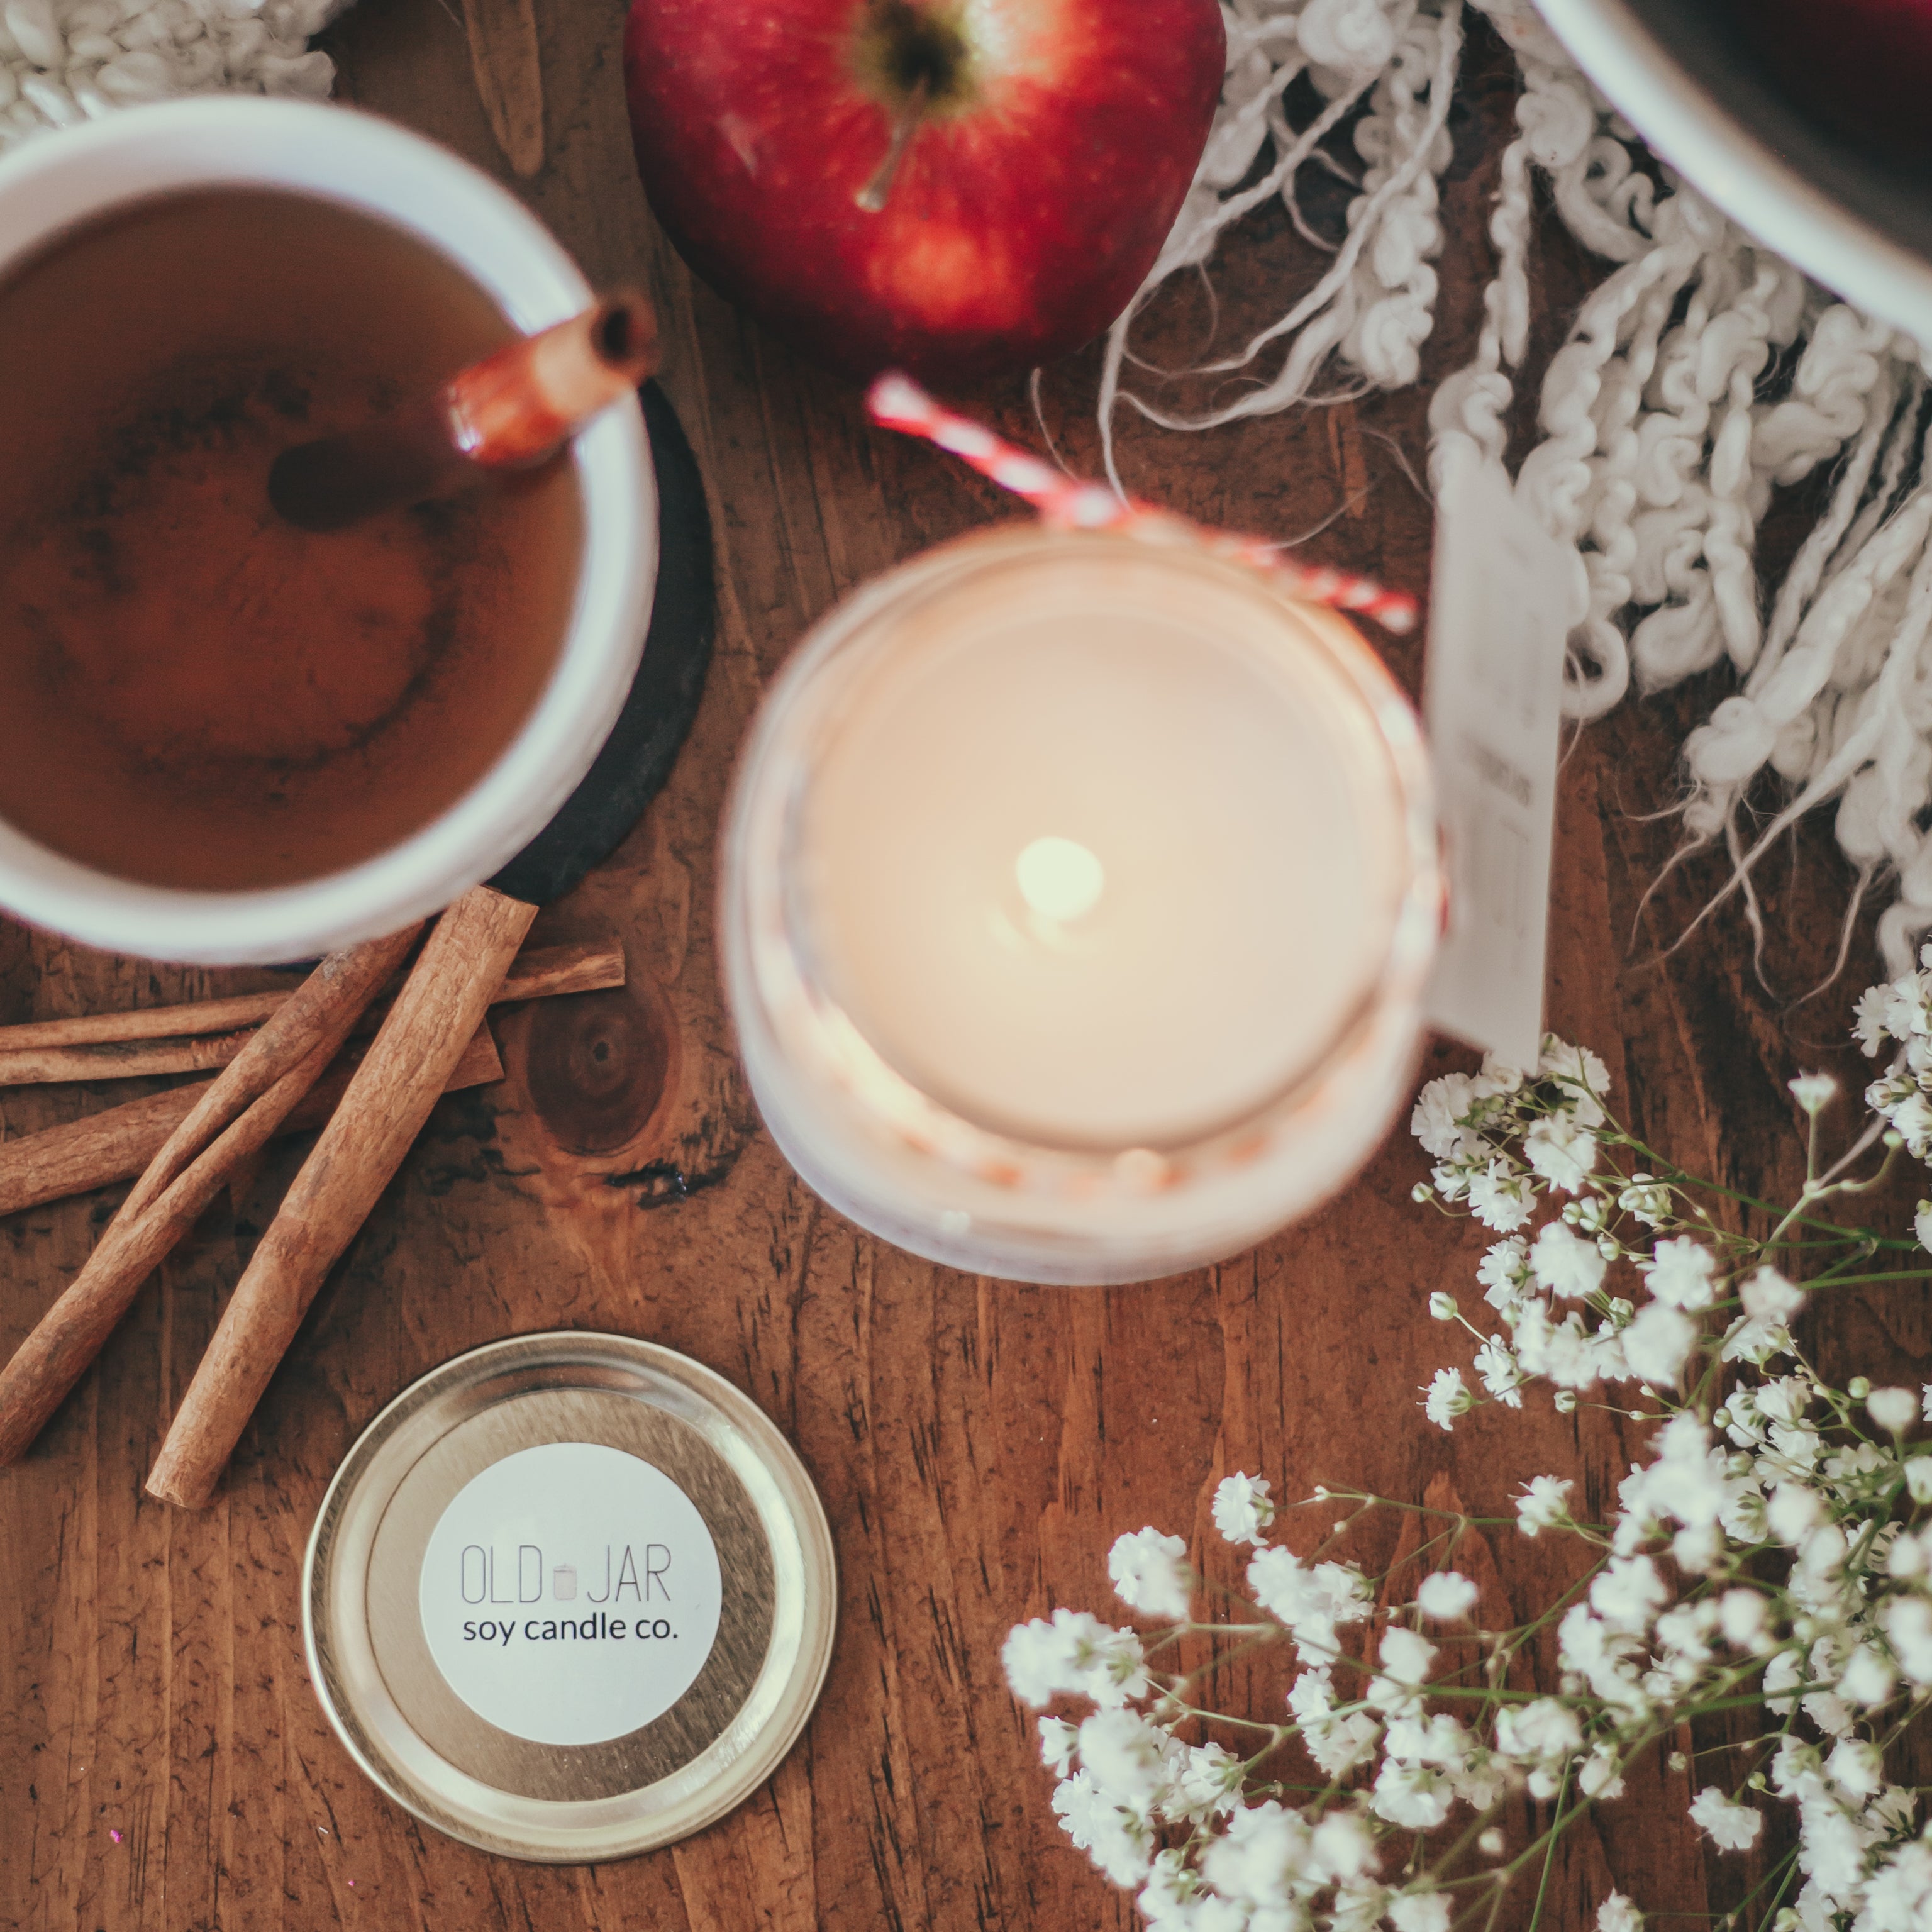 Mulled Apple Cider Soy Candle